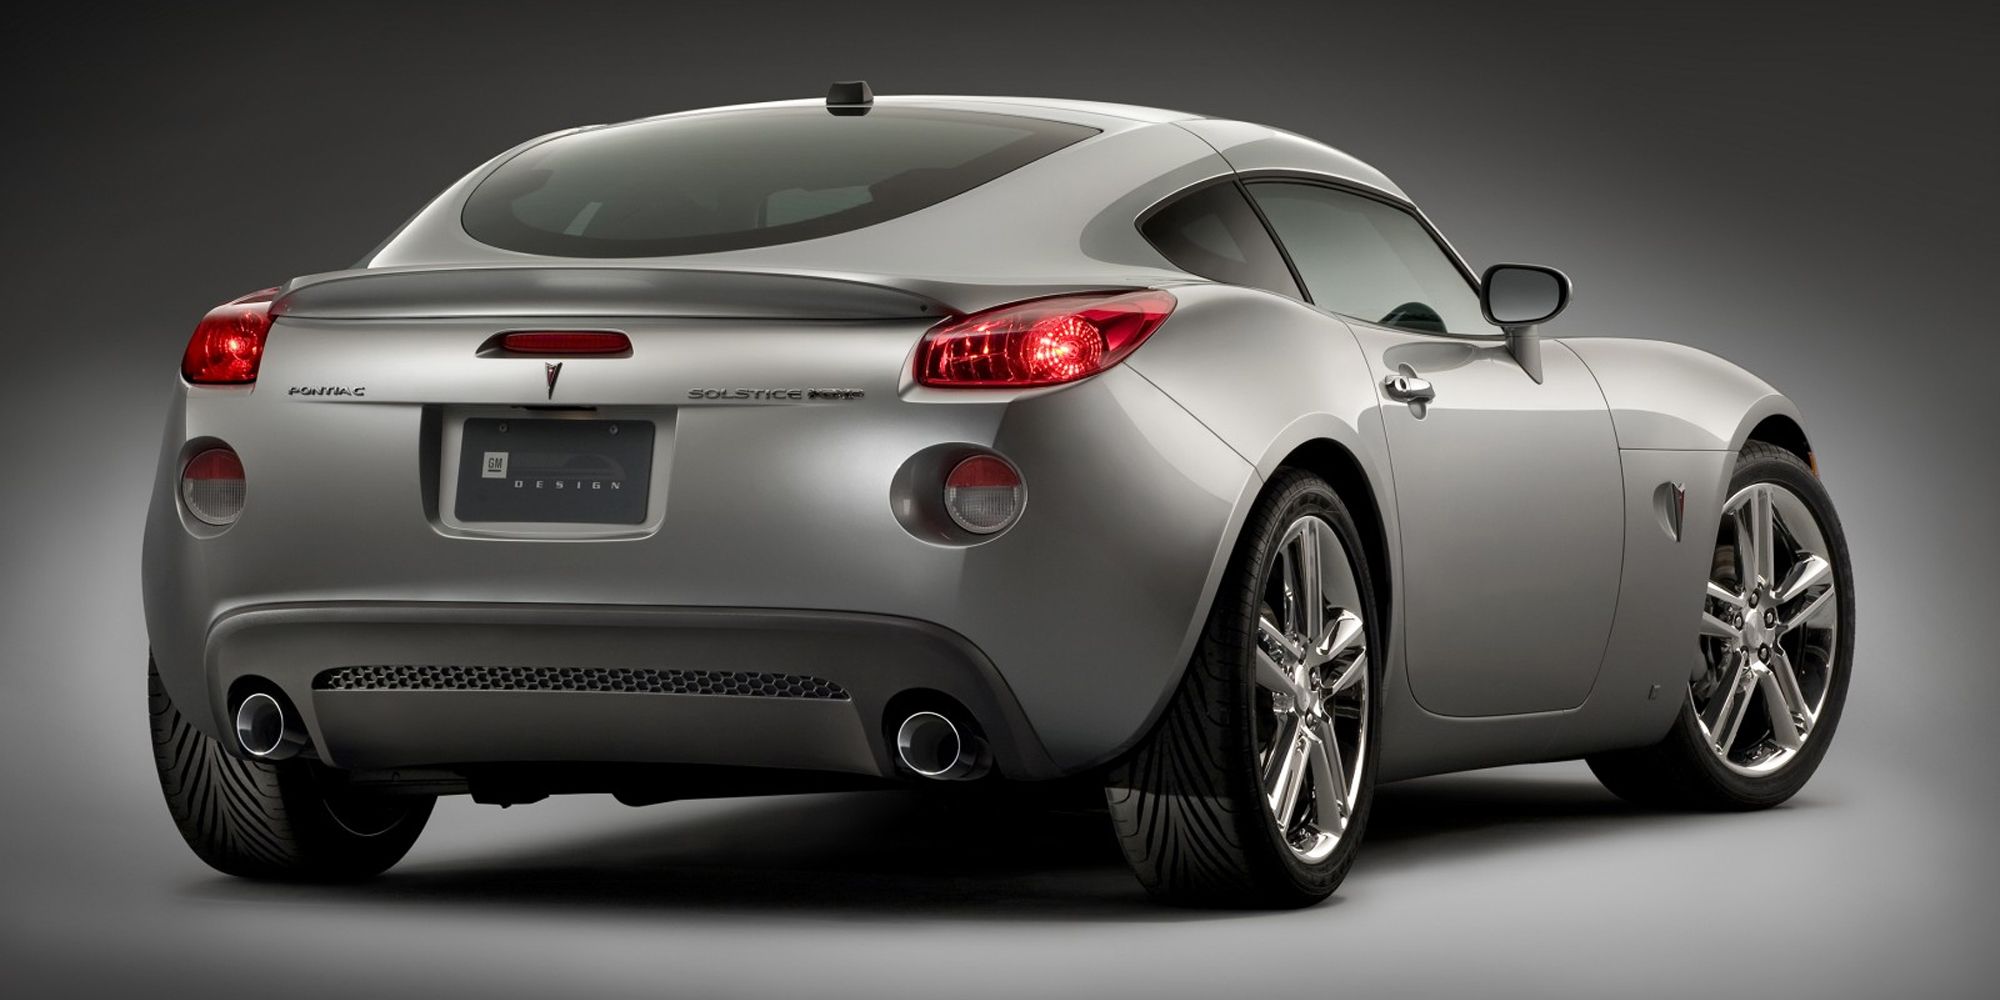 The rear of the Solstice GXP